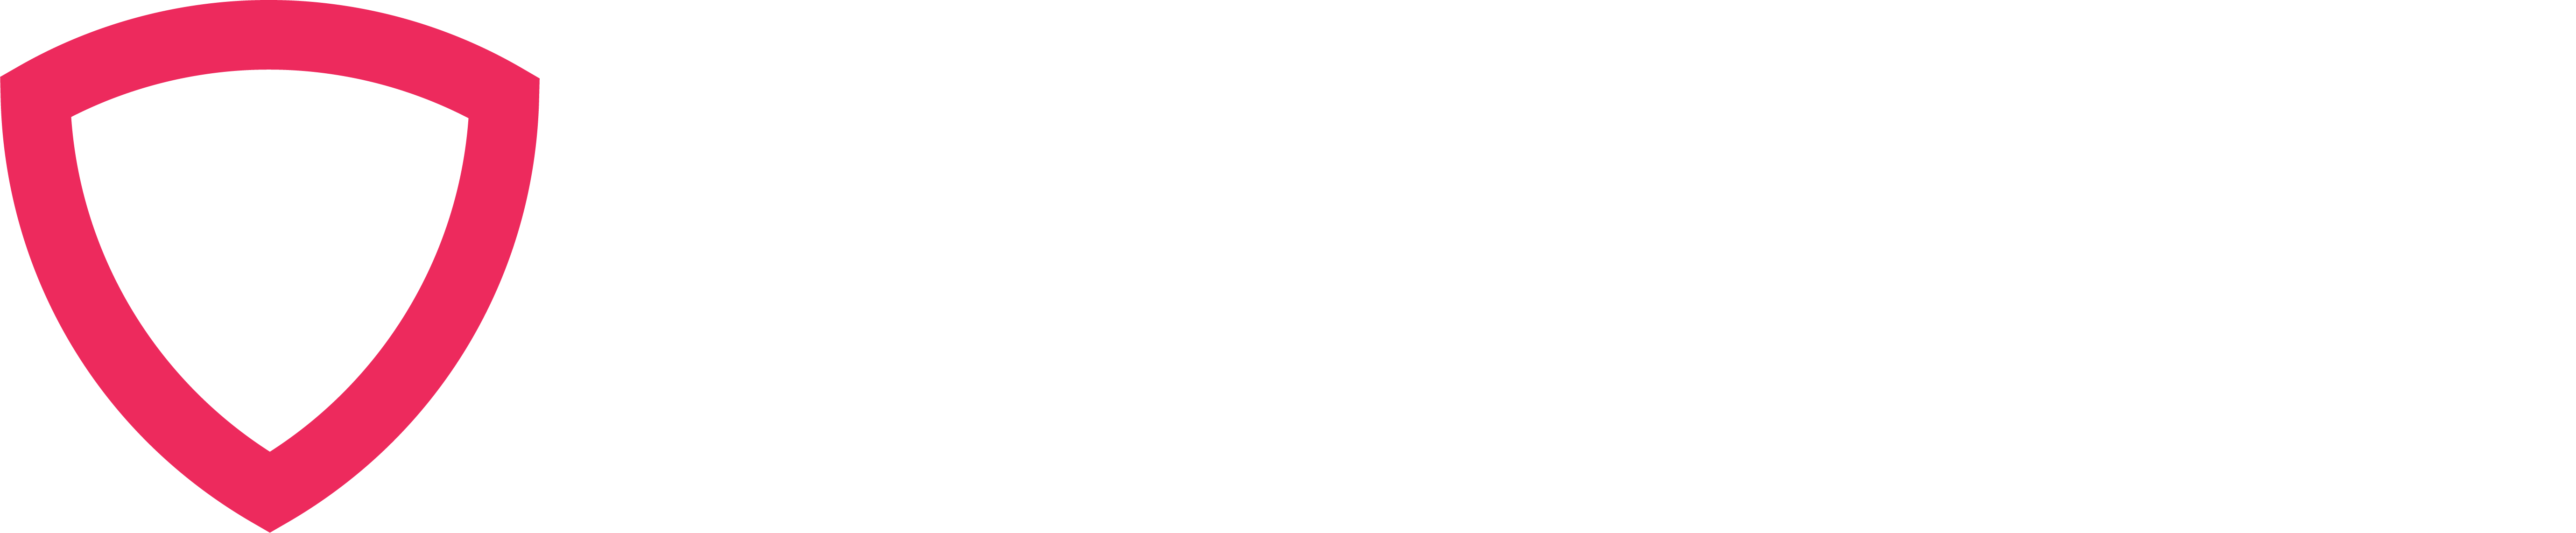 Hoxhunt_logo_whitetextpng.png